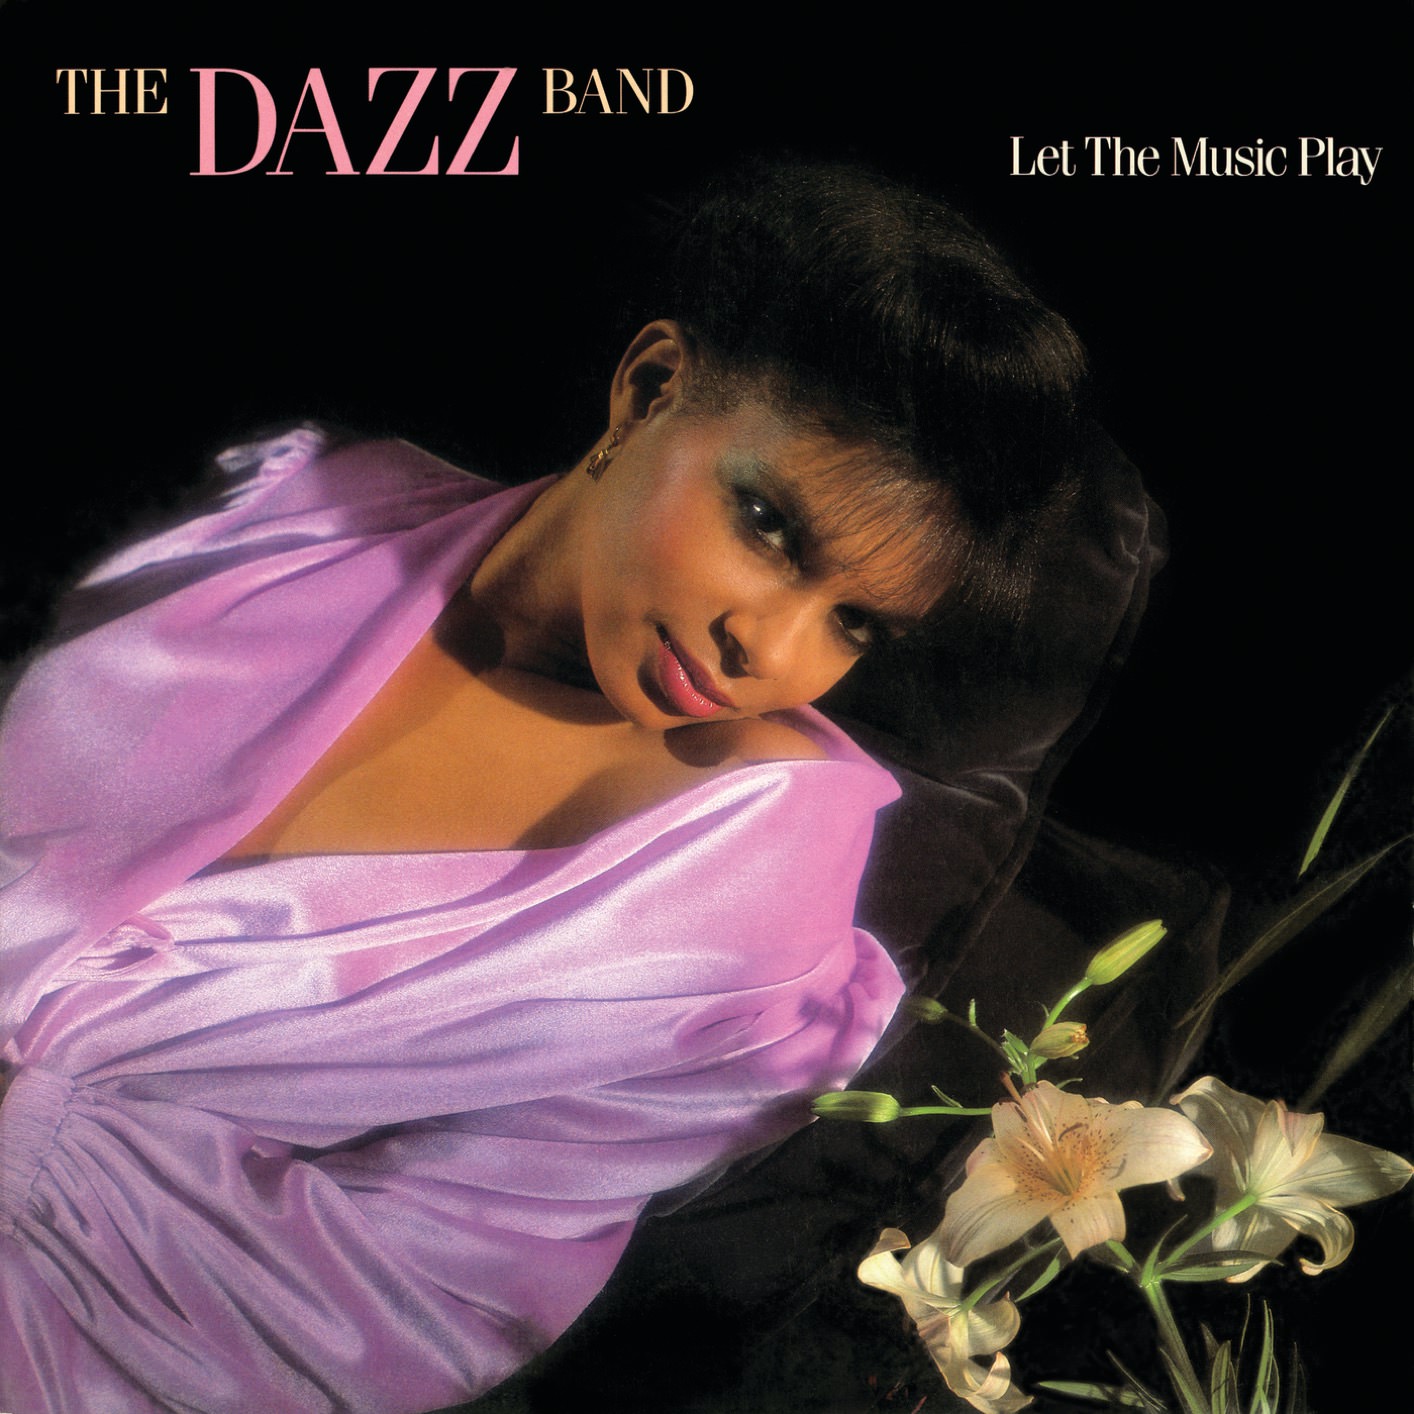 The Dazz Band – Let The Music Play (1981/2018) [FLAC 24bit/96kHz]